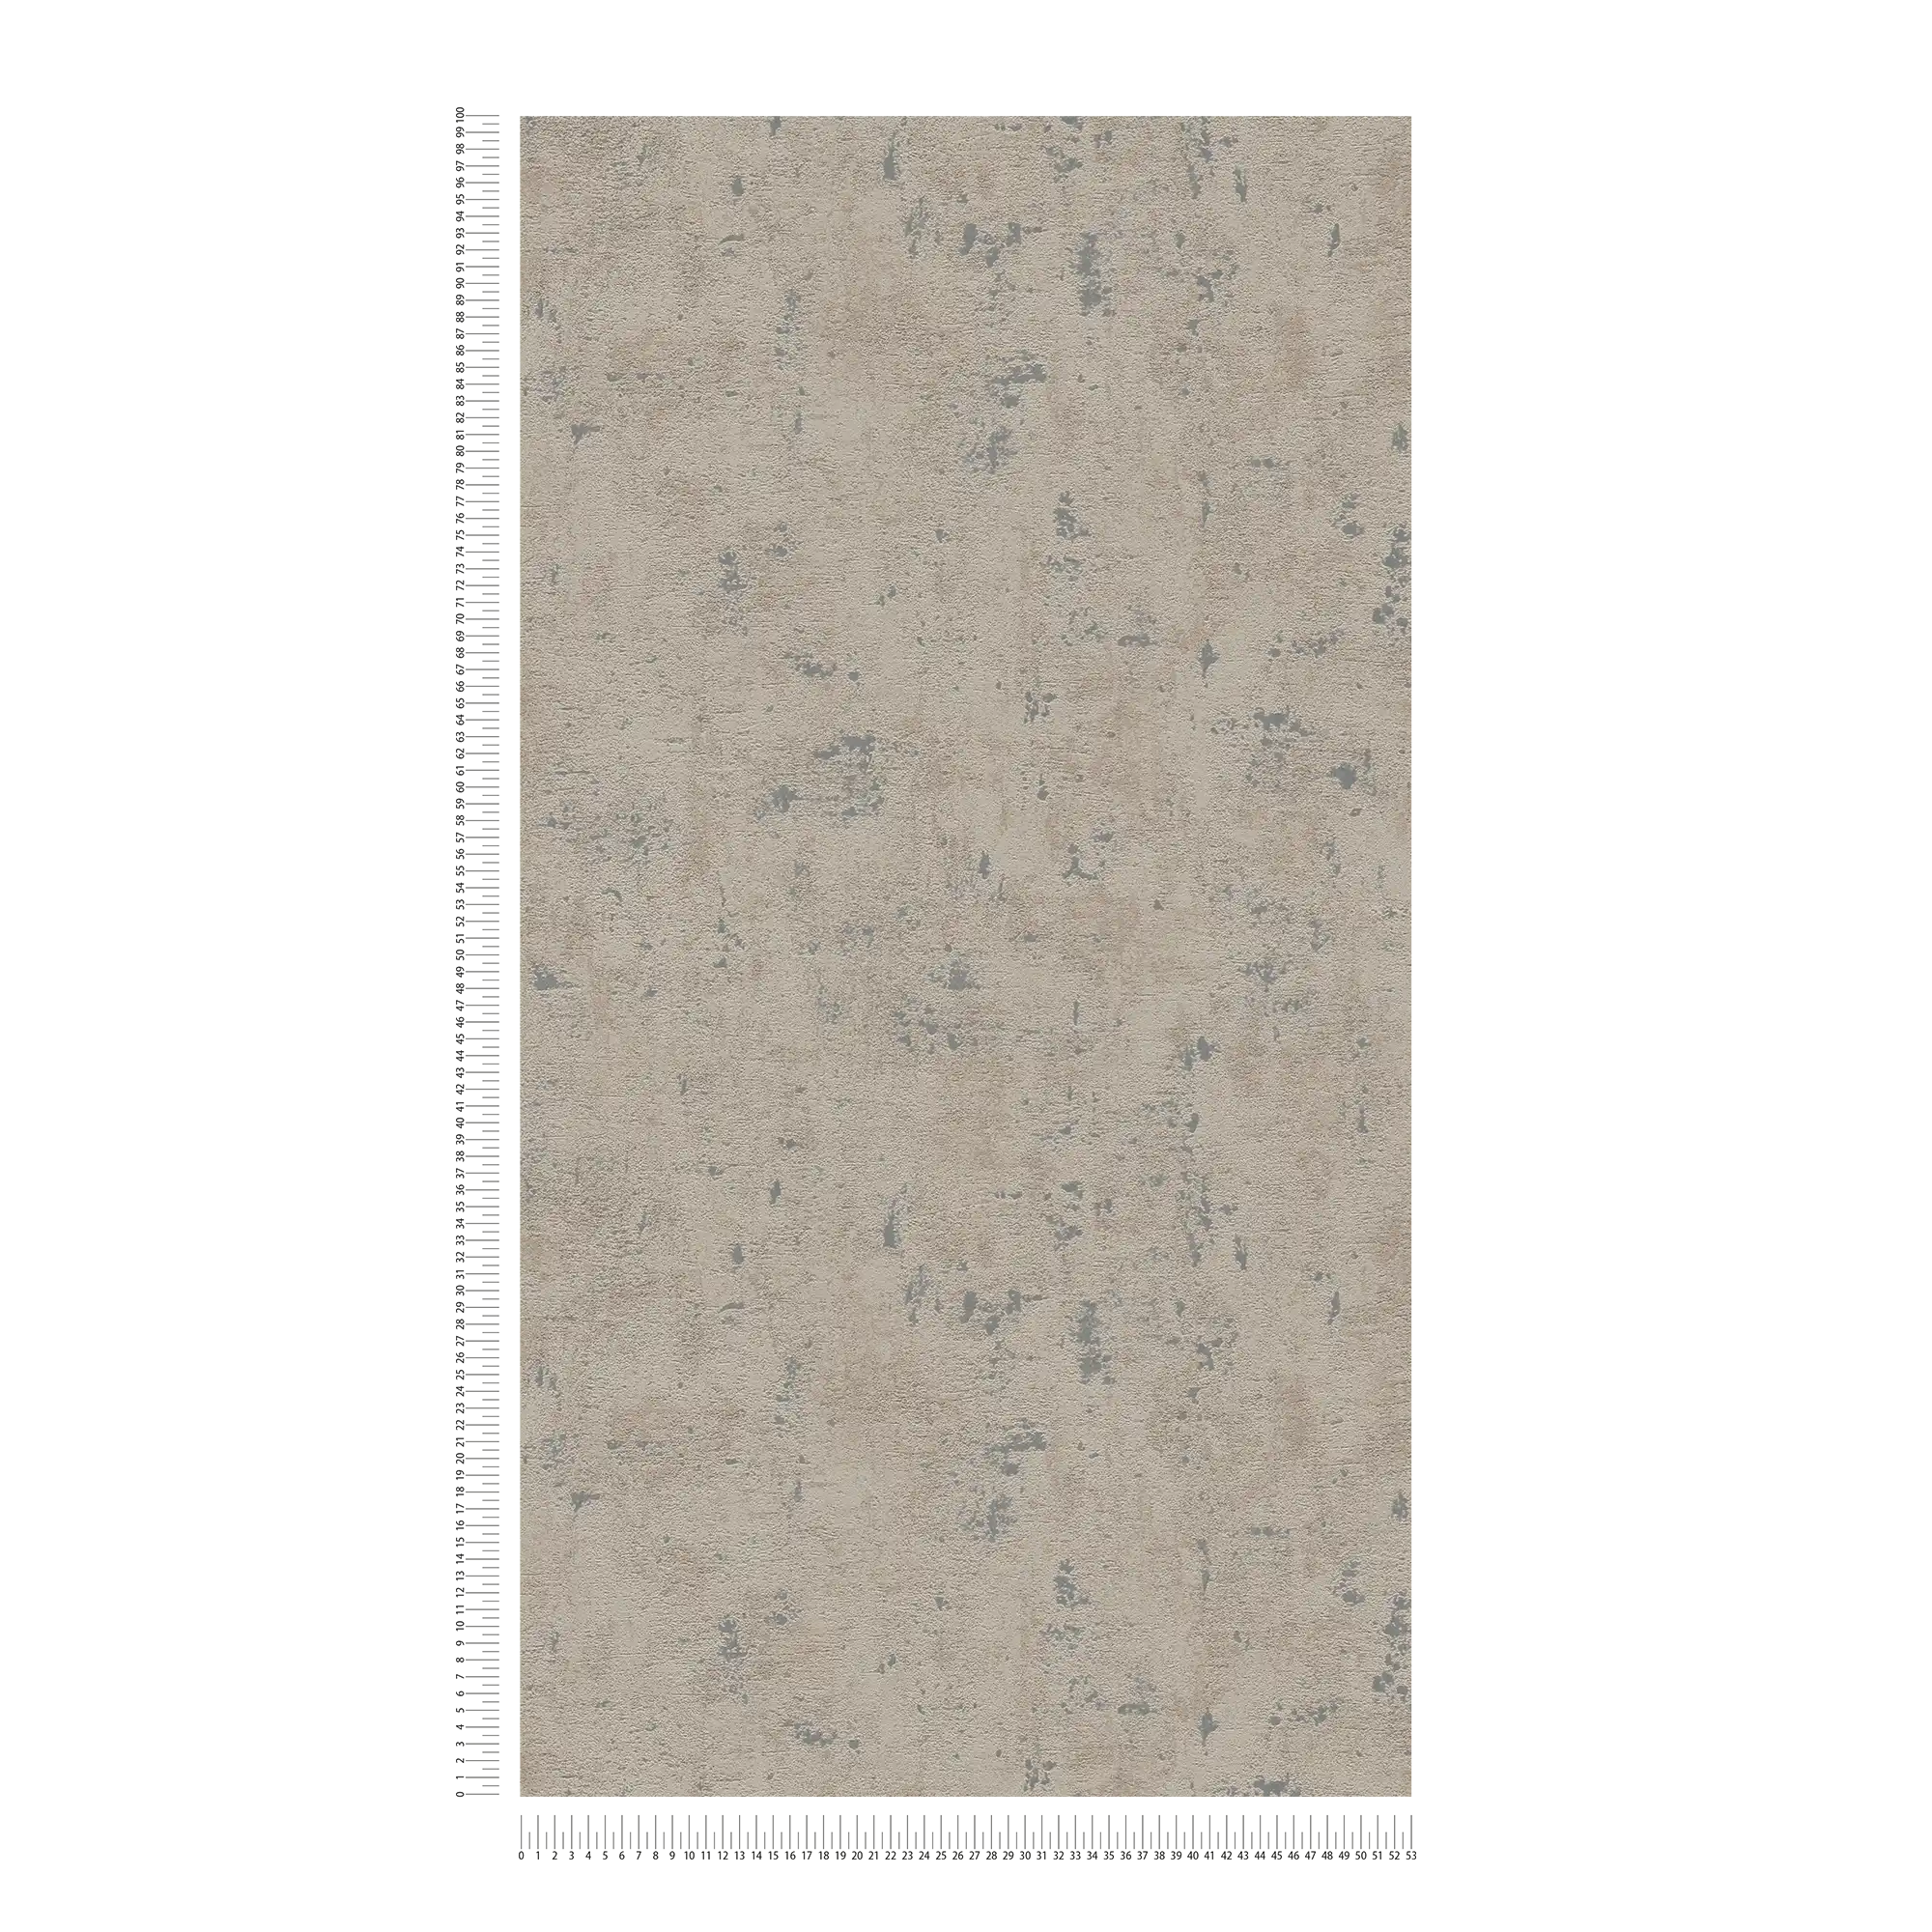             Wallpaper with abstract raffia pattern and metallic effects - grey, silver
        